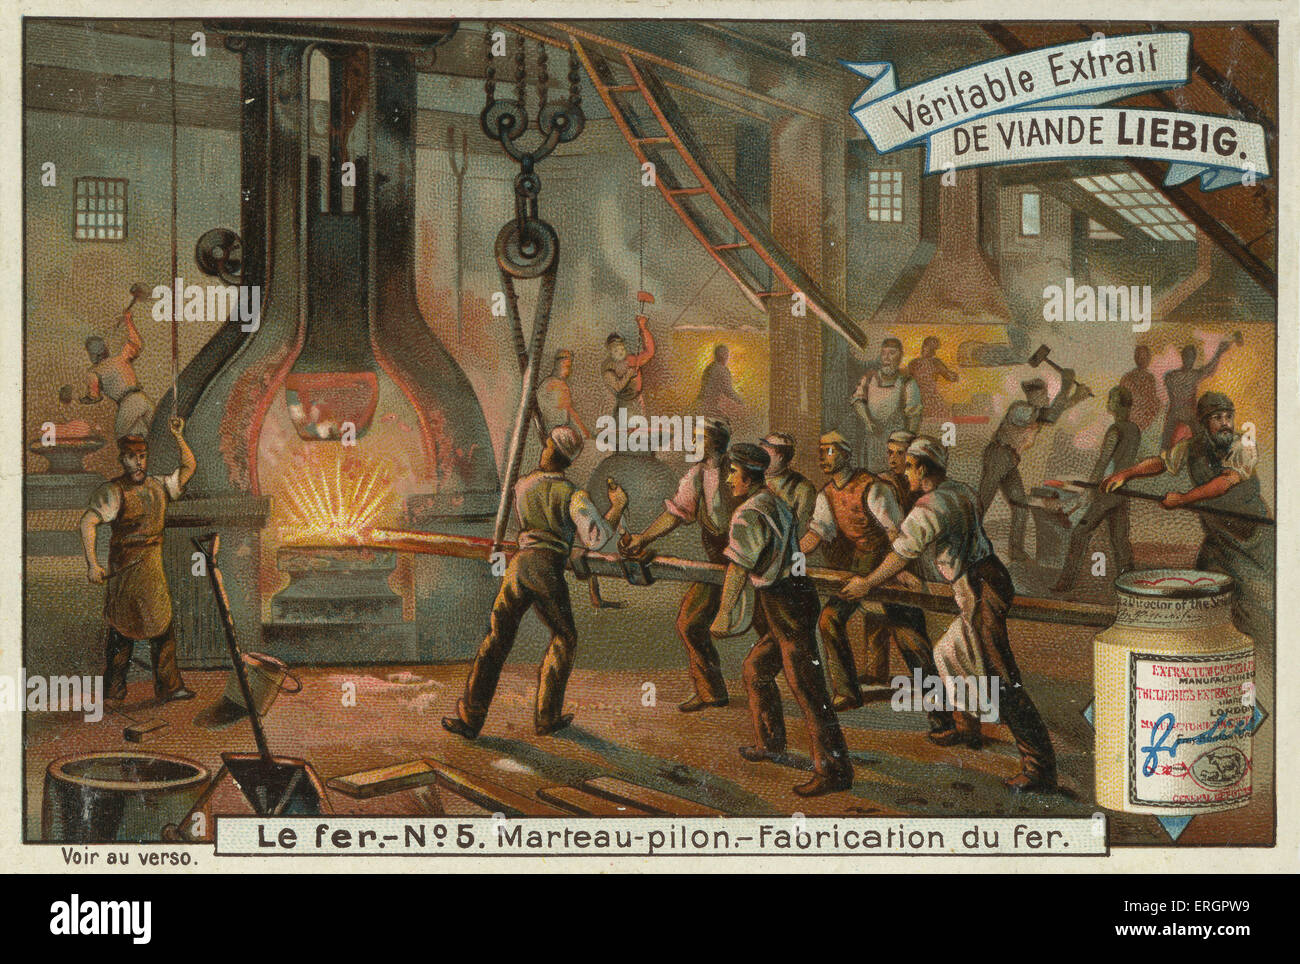 Forging iron, ironworks scene. Workers use machinery to shape iron objects. From a recipe card for Liebig 's Extract of Meat. Stock Photo